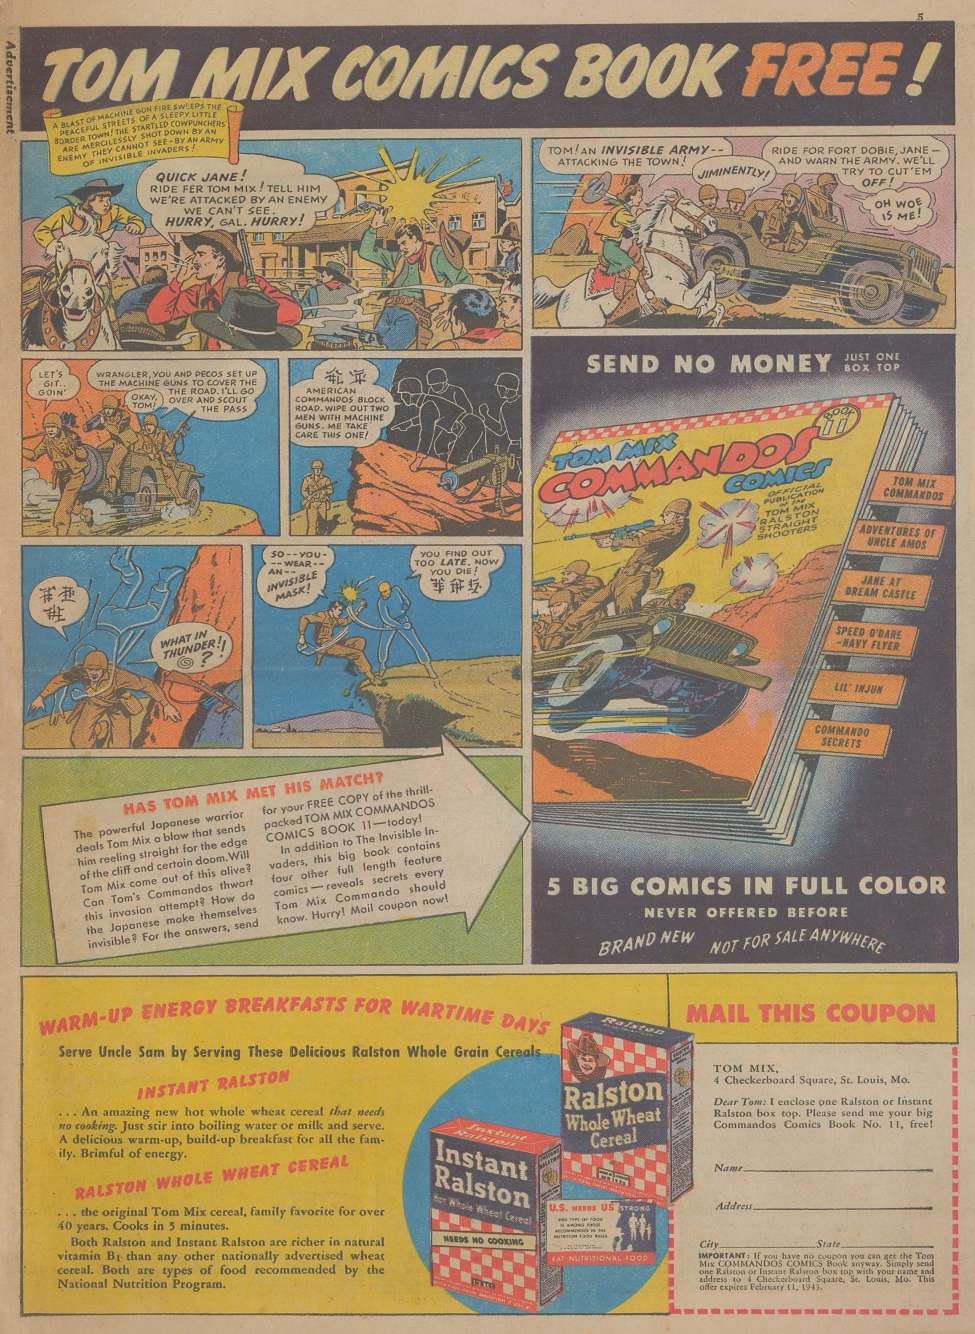 Book Cover For Tom Mix Comics Giveaway Ad Section (1942)